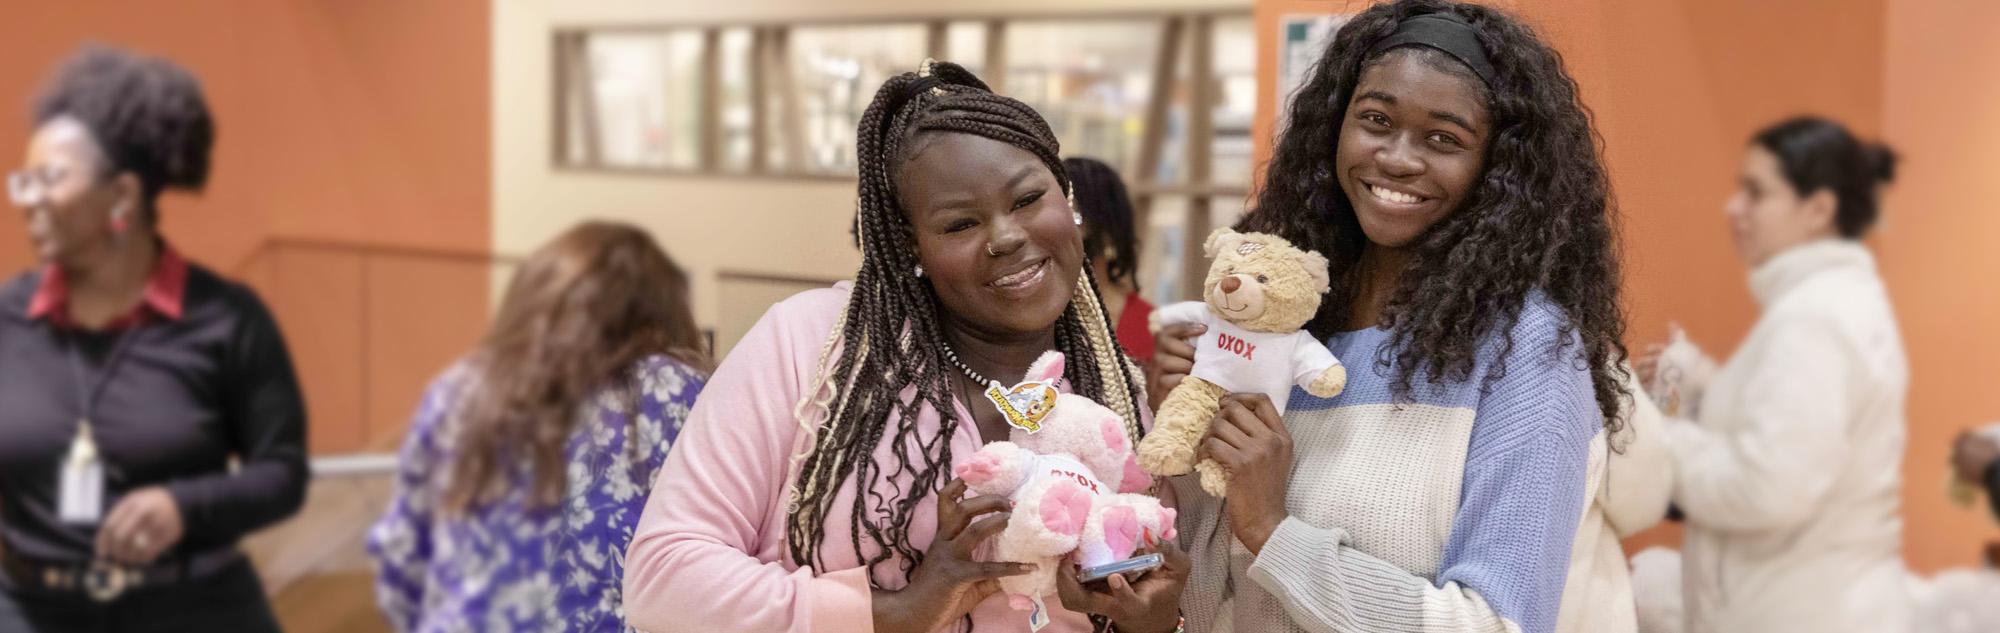 Students pose with build-a-valentine stuffed animals at the Southeast campus.